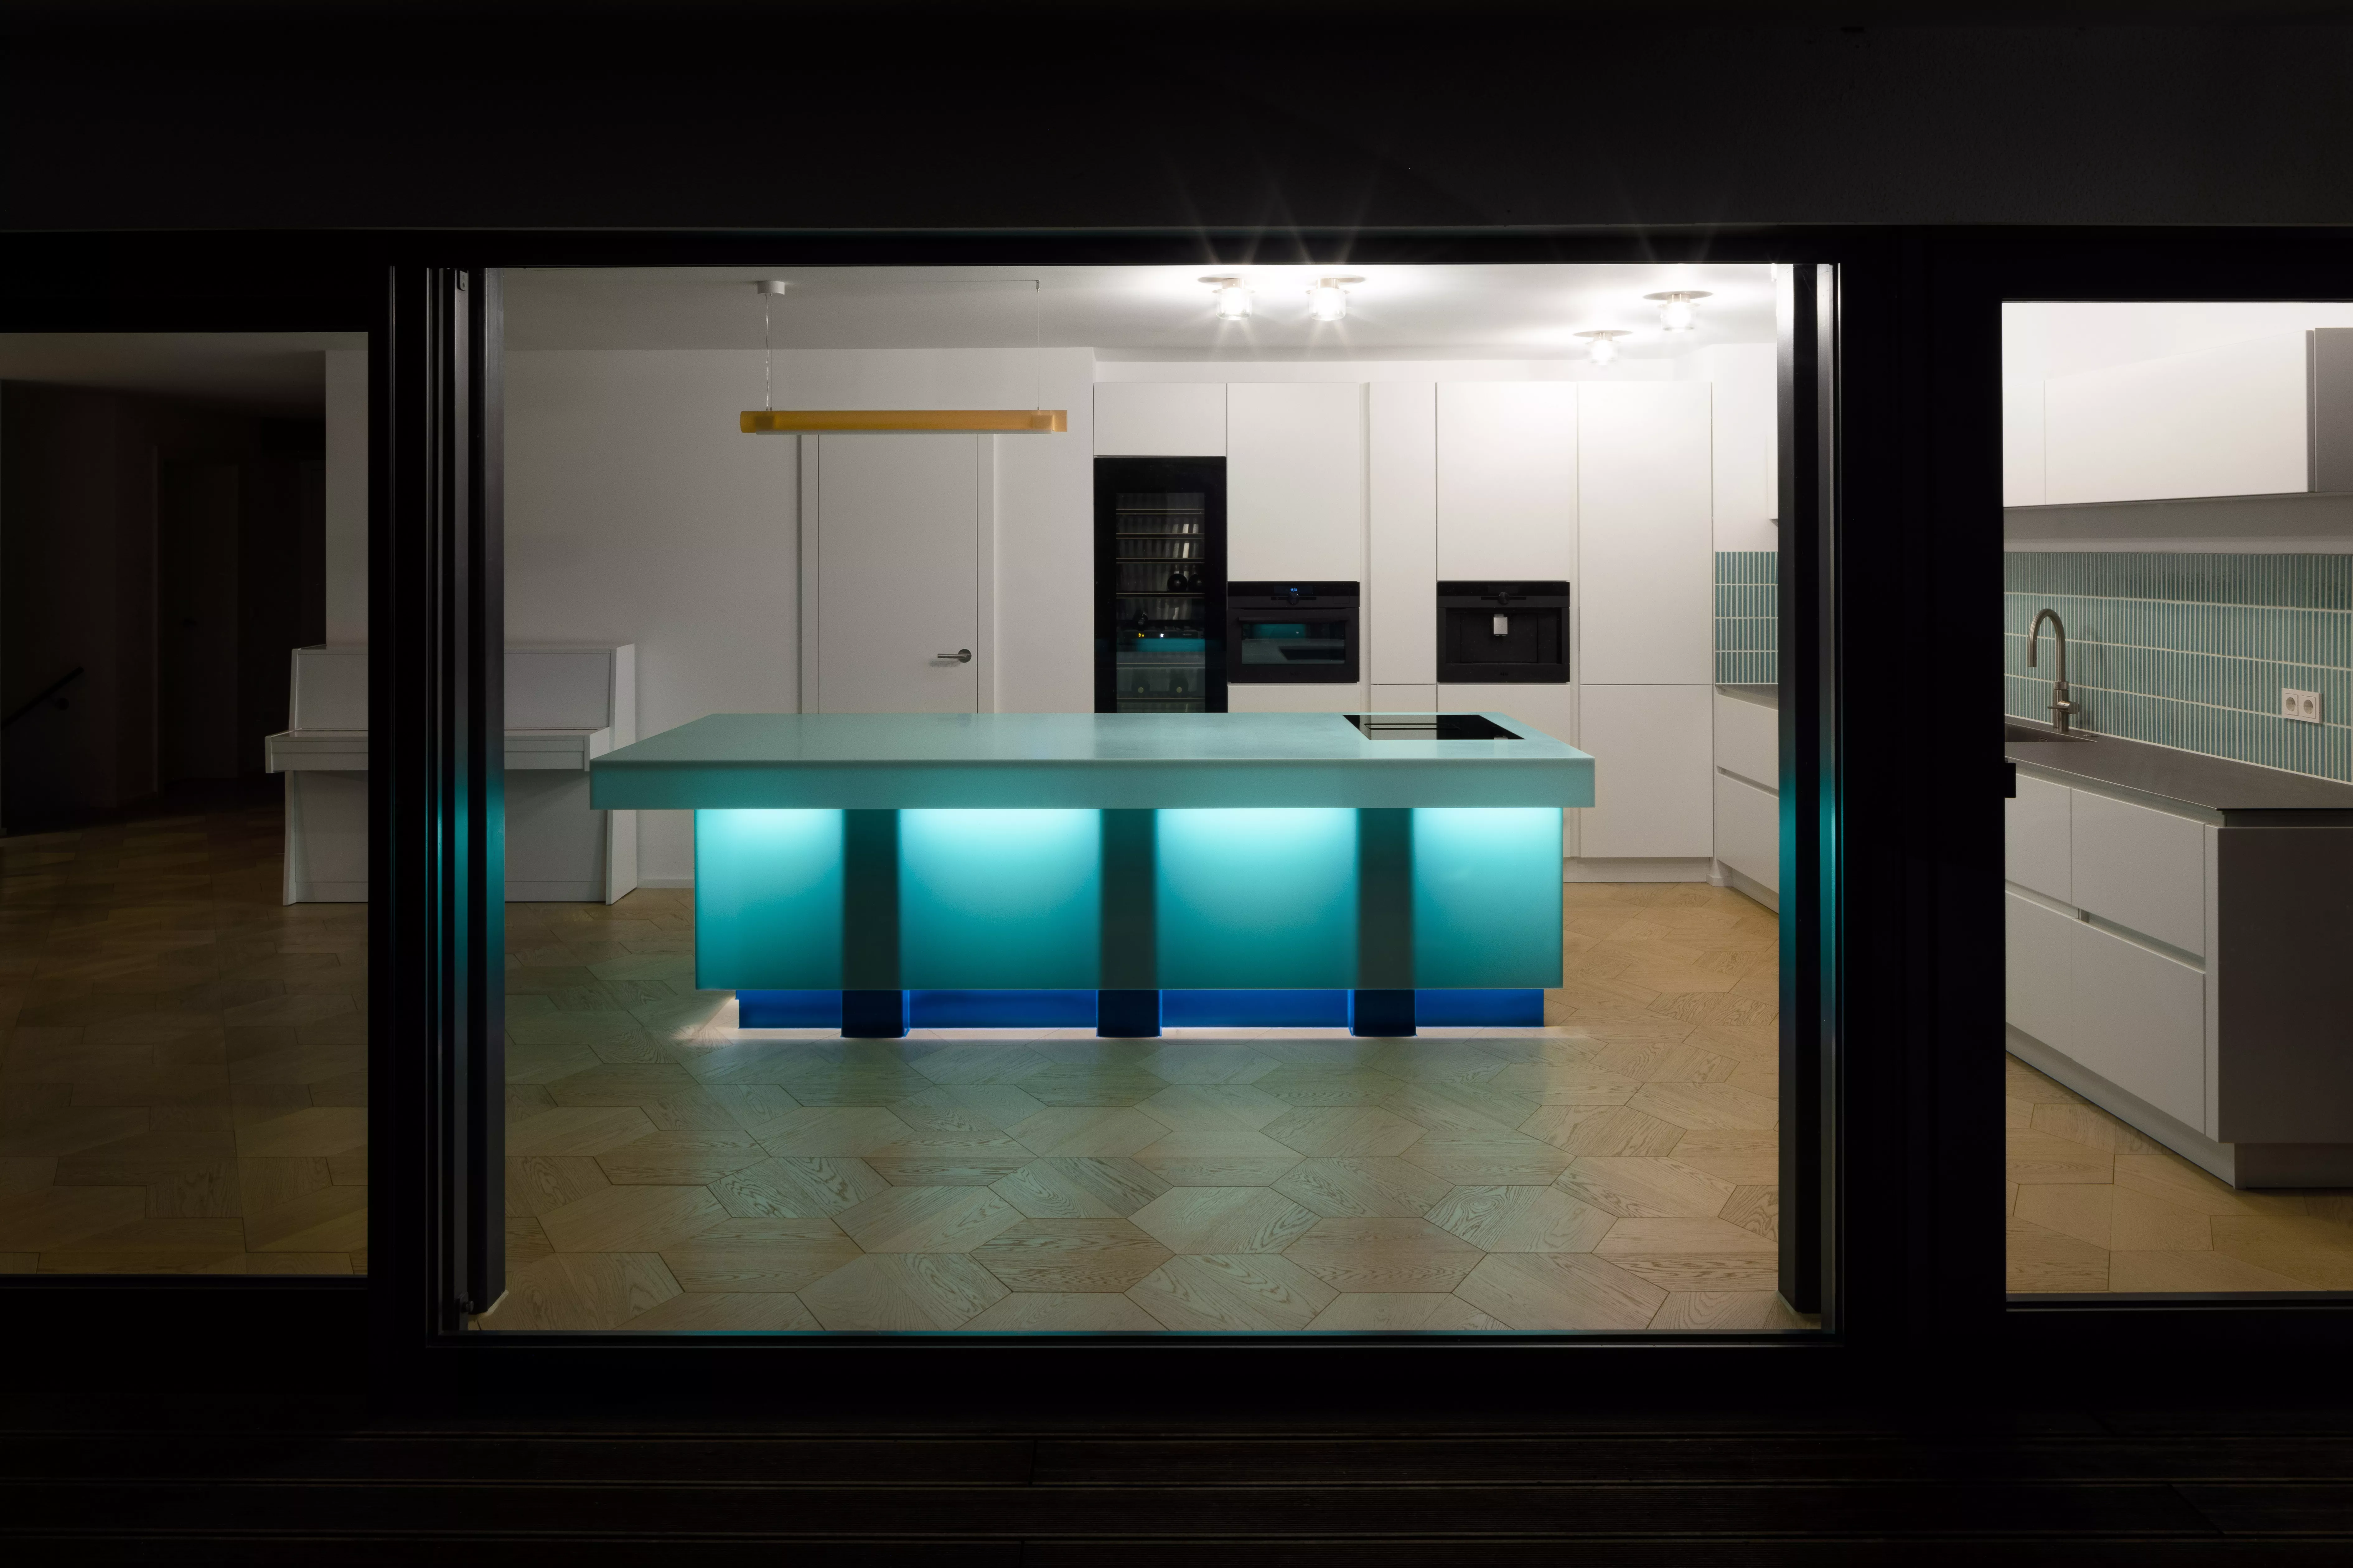 Playing with contrast: A sensational kitchen counter made of HIMACS Emerald green